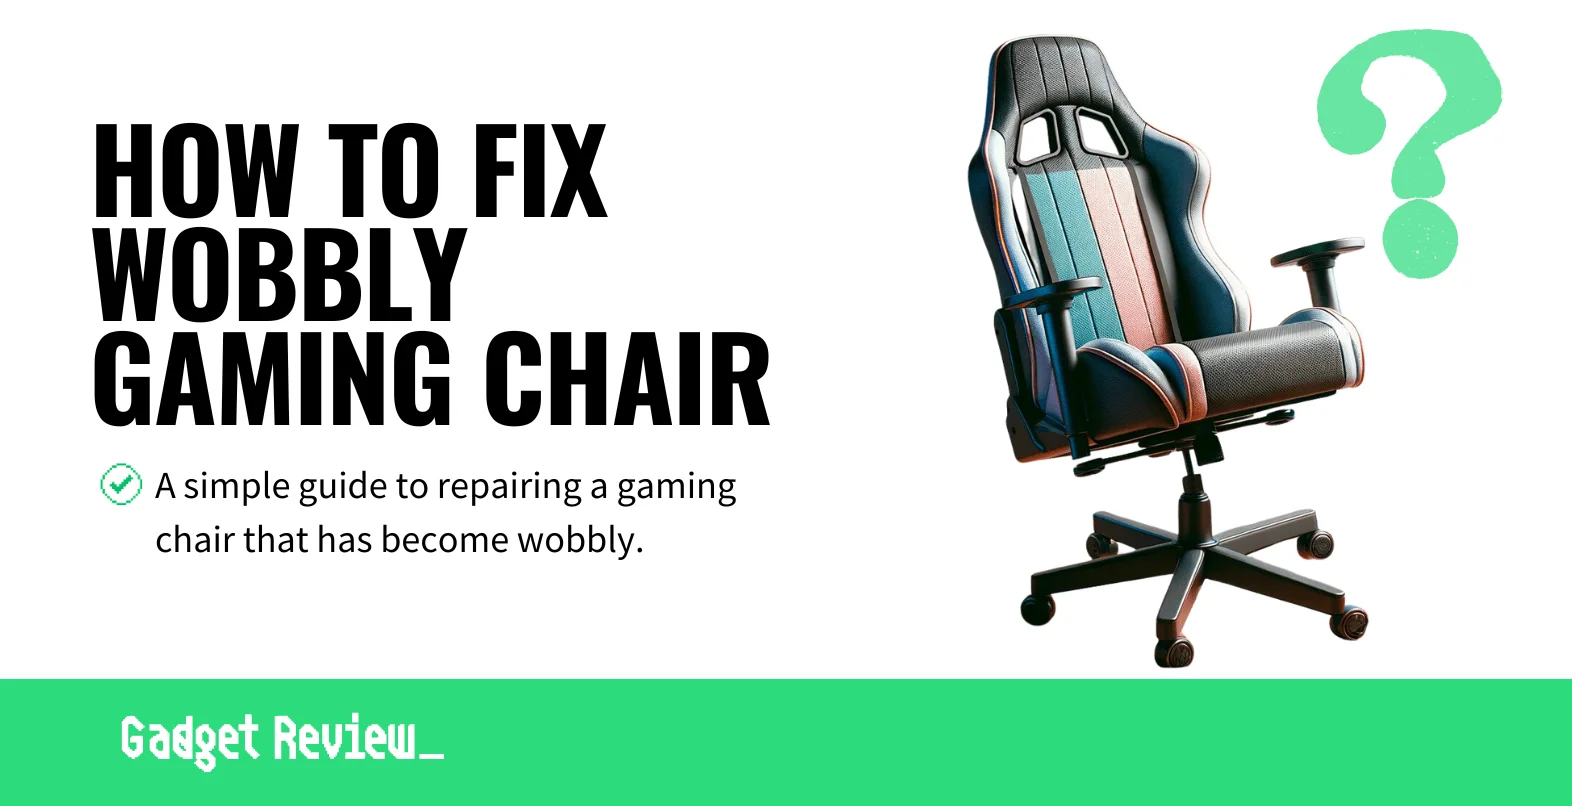 How to Fix a Wobbly Gaming Chair